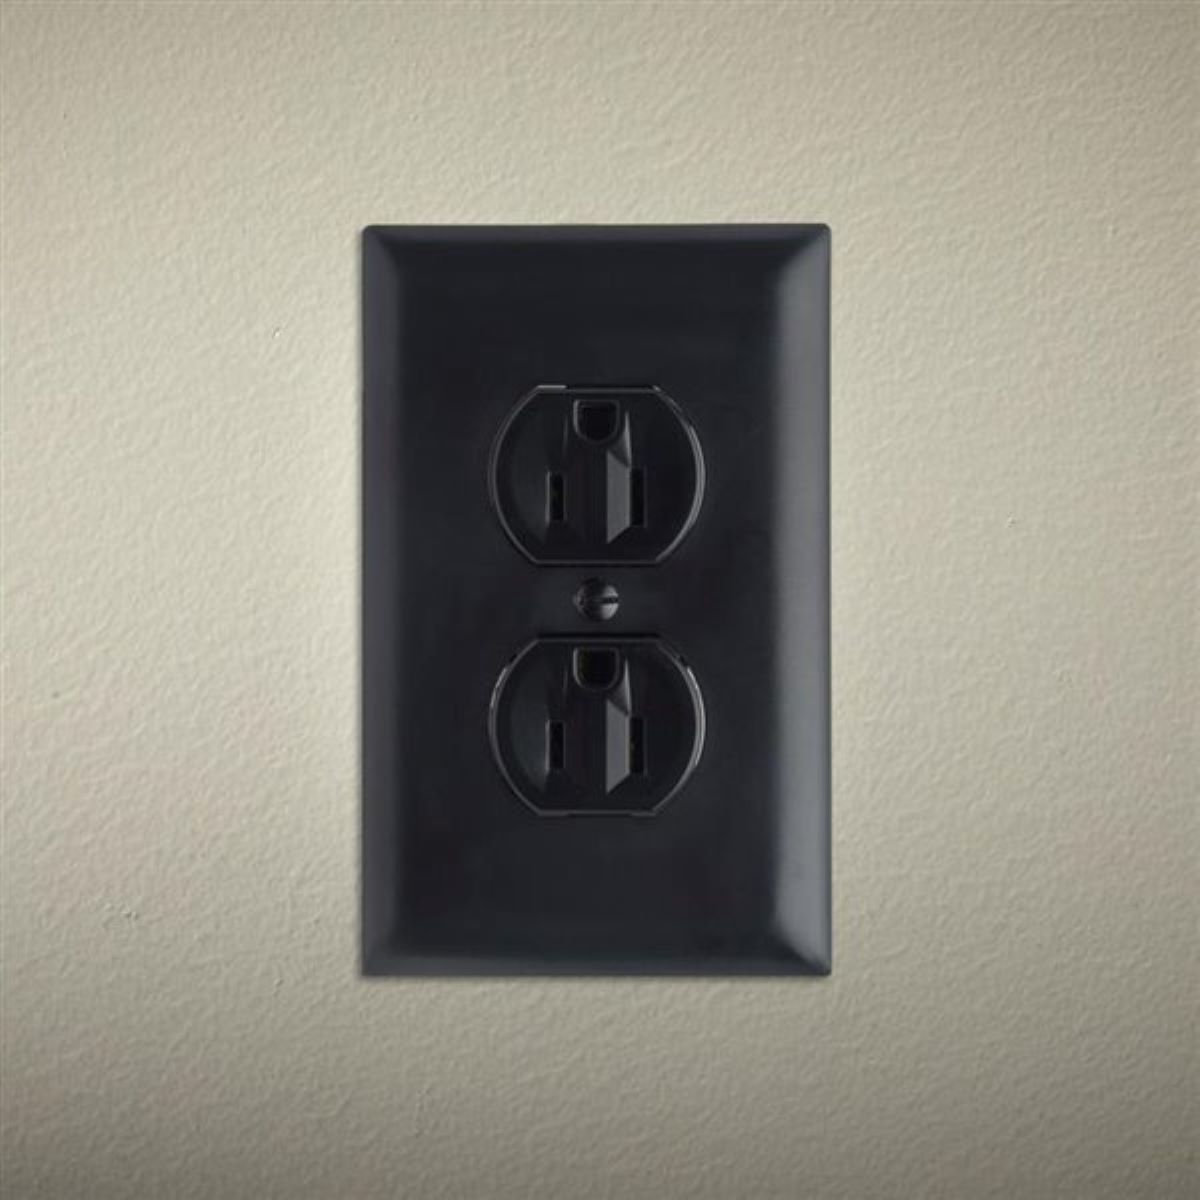 20 Things to Fix Around the House for Under $20 - wall plate